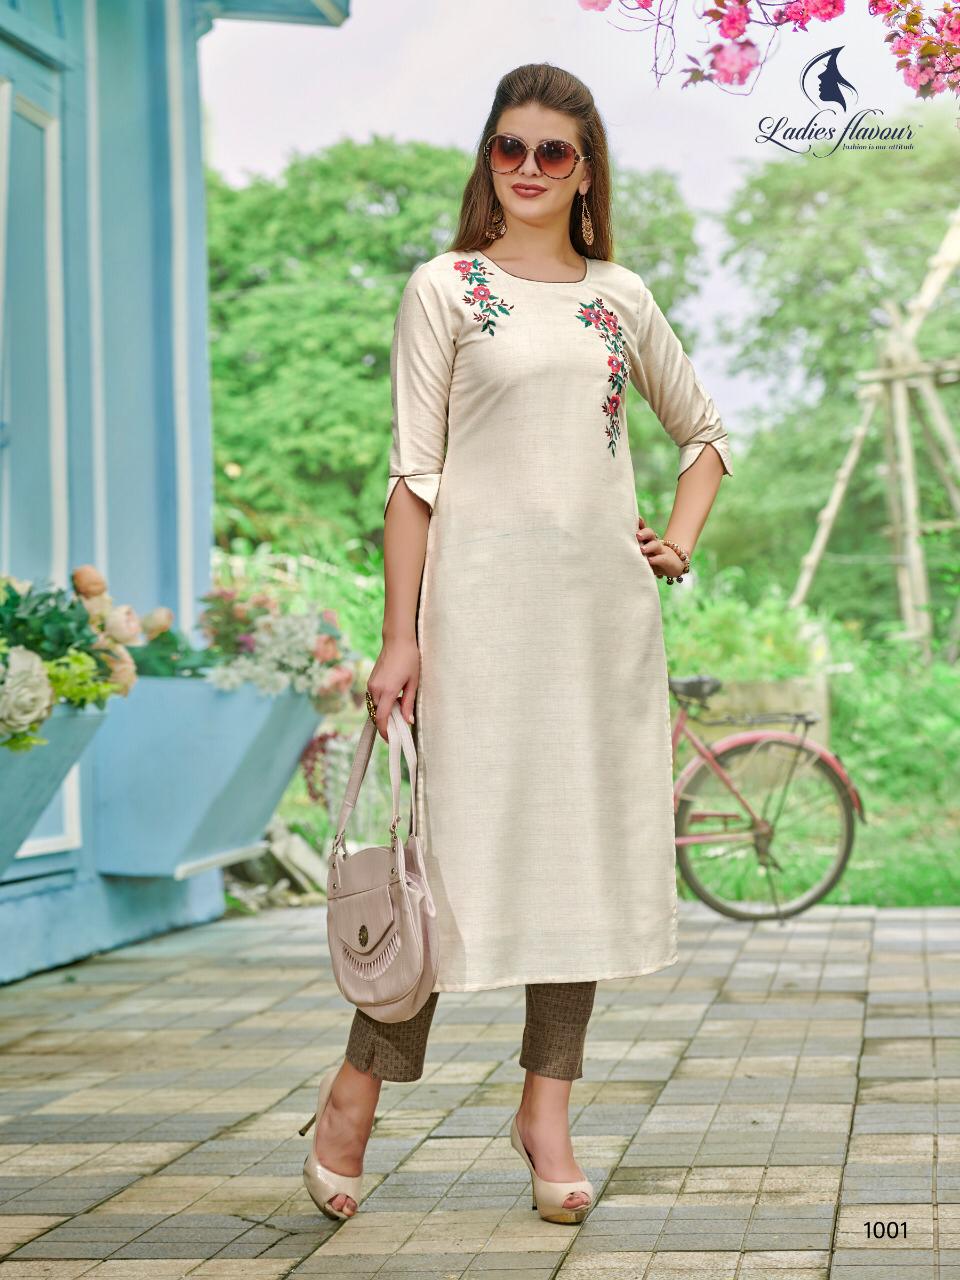 How To Choose A Kurti That Suits Your Body Type? | India.com